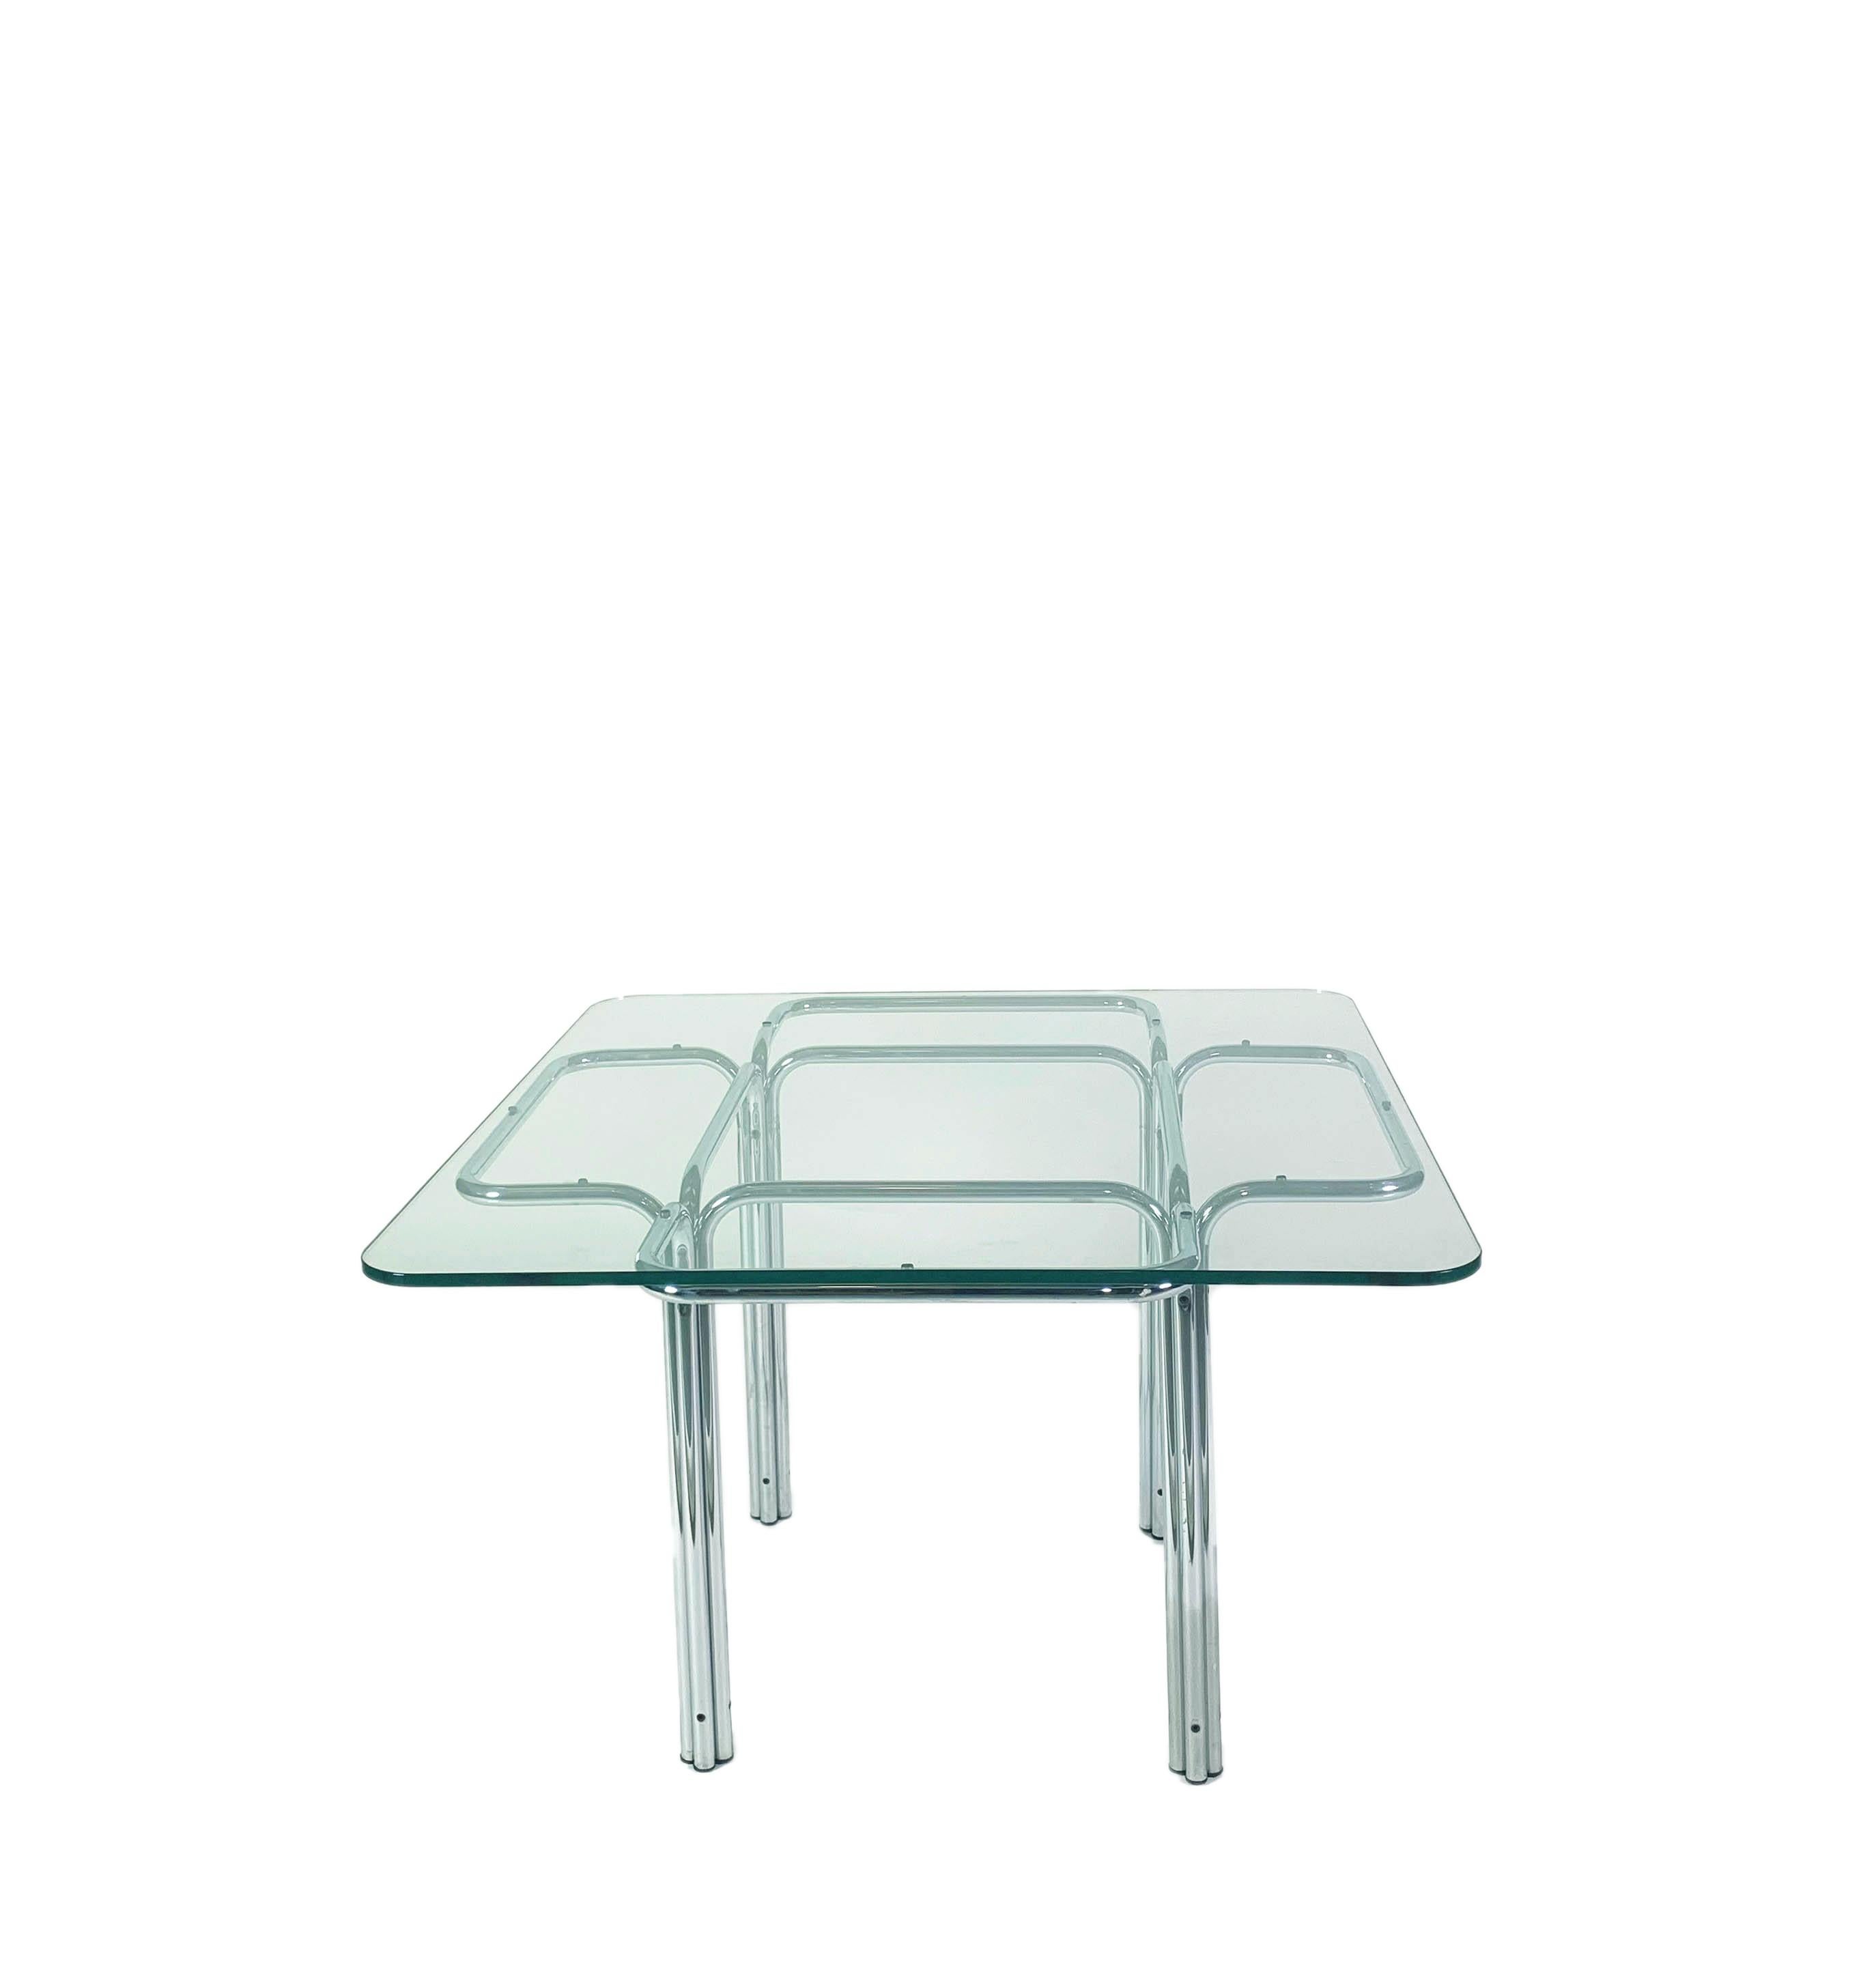 Powerfully expressive, Topos table draws inspiration from the fluid, organic shape of flower, true sculpture produced by nature. The structure has a metal tubing with polished chrome finish rises from the ground and opens like a flower to form a